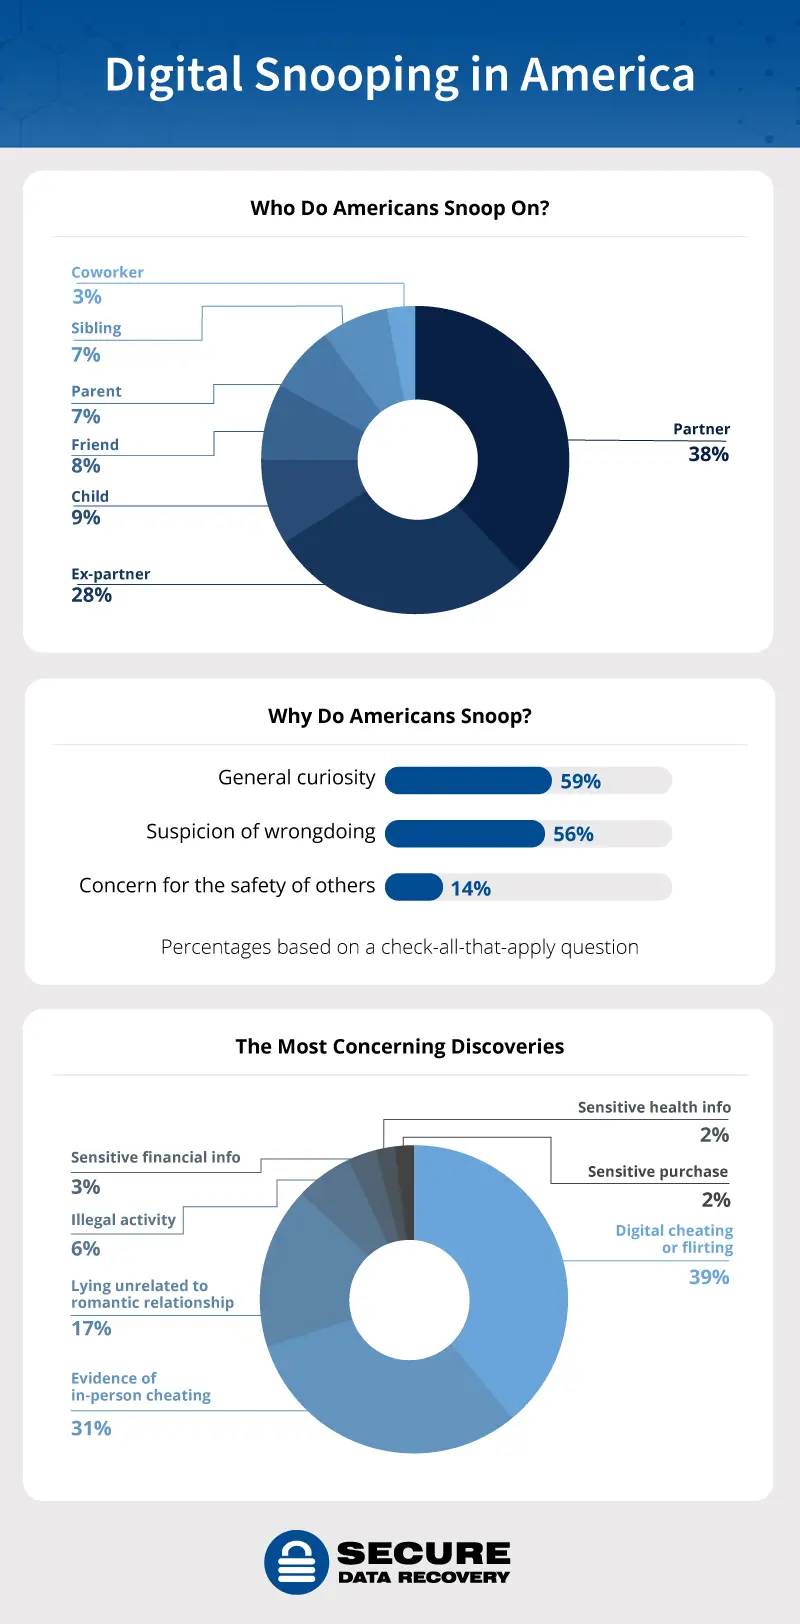 data on who Americans snoop on, why they snoop, and what they discover from it